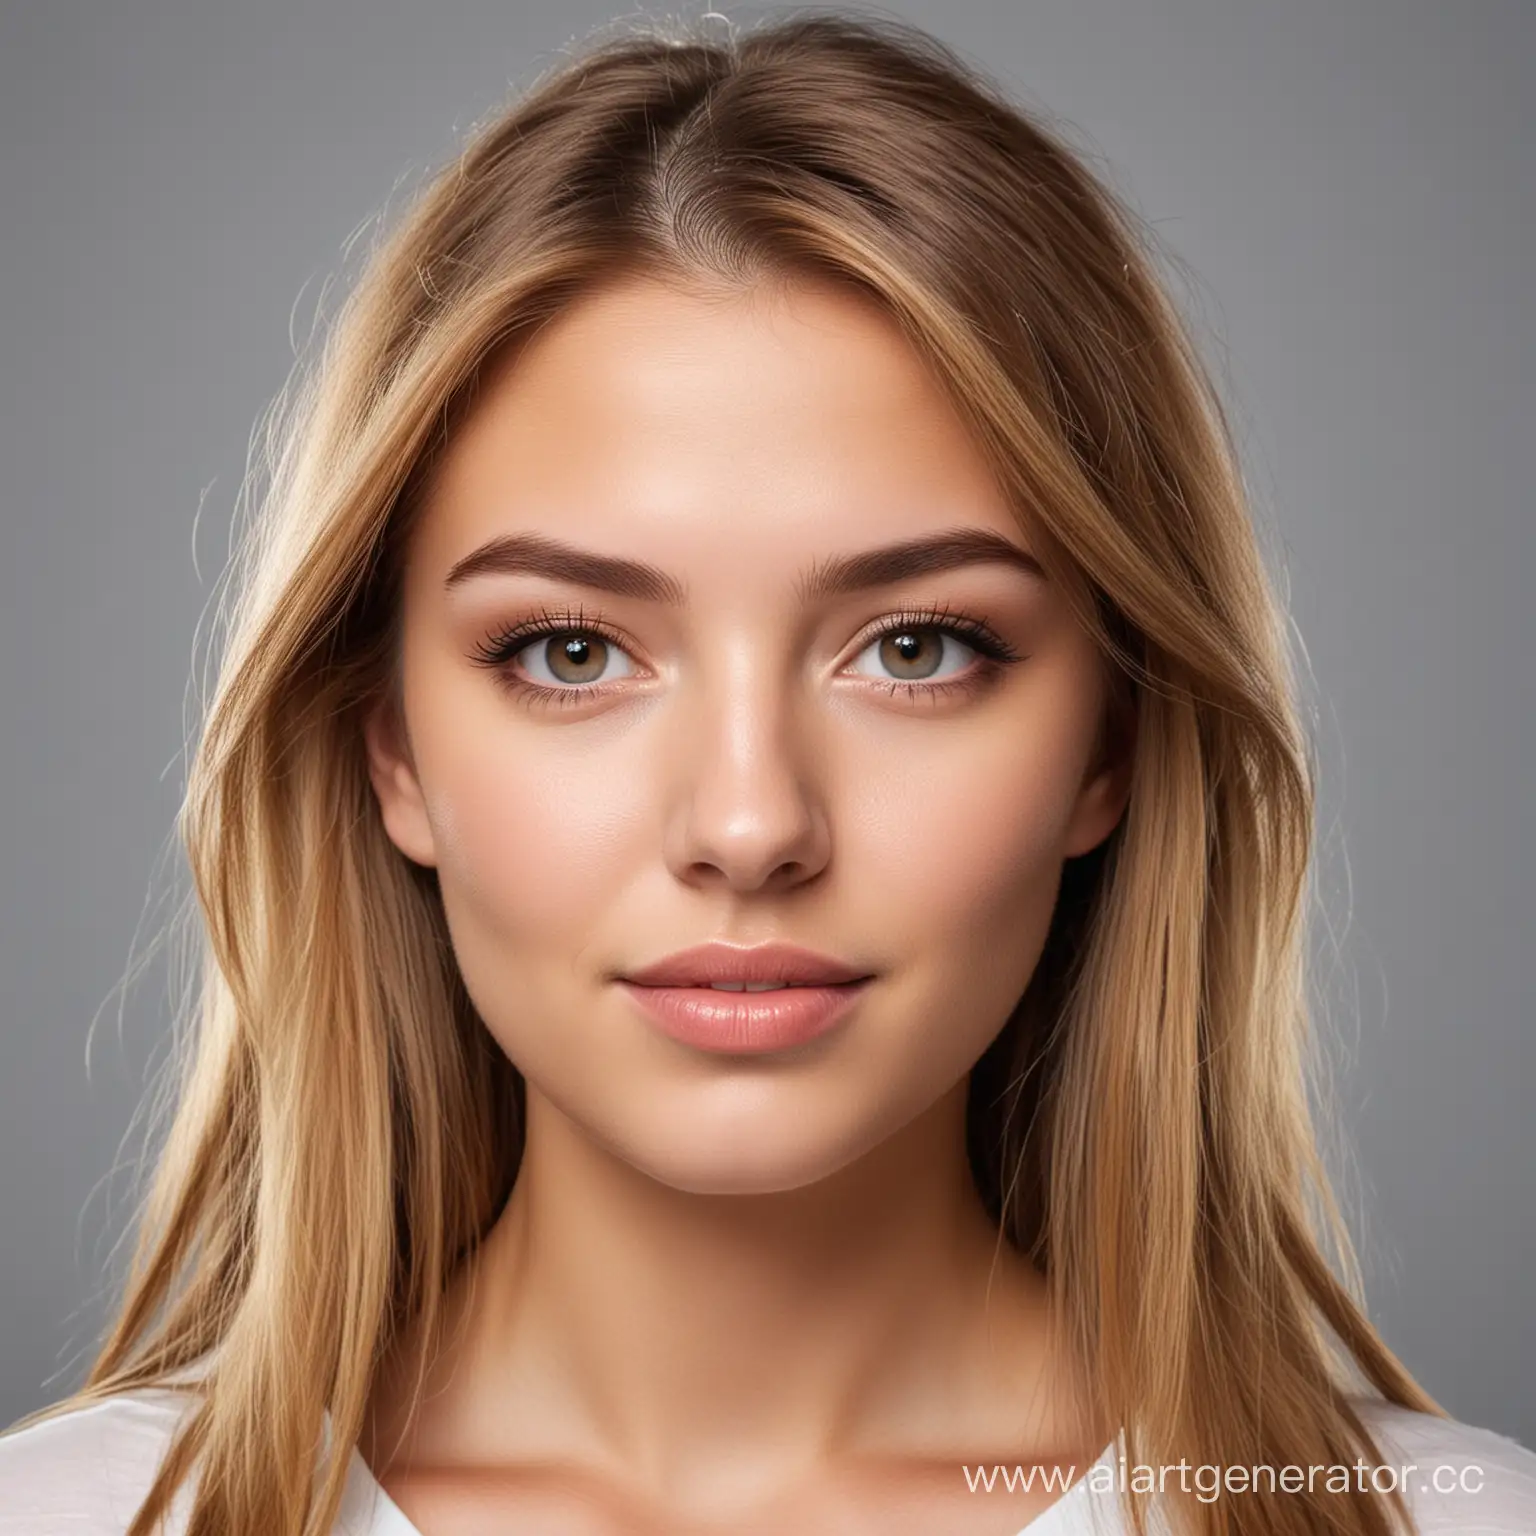 Portrait-of-a-Girl-from-a-Marketing-Agency